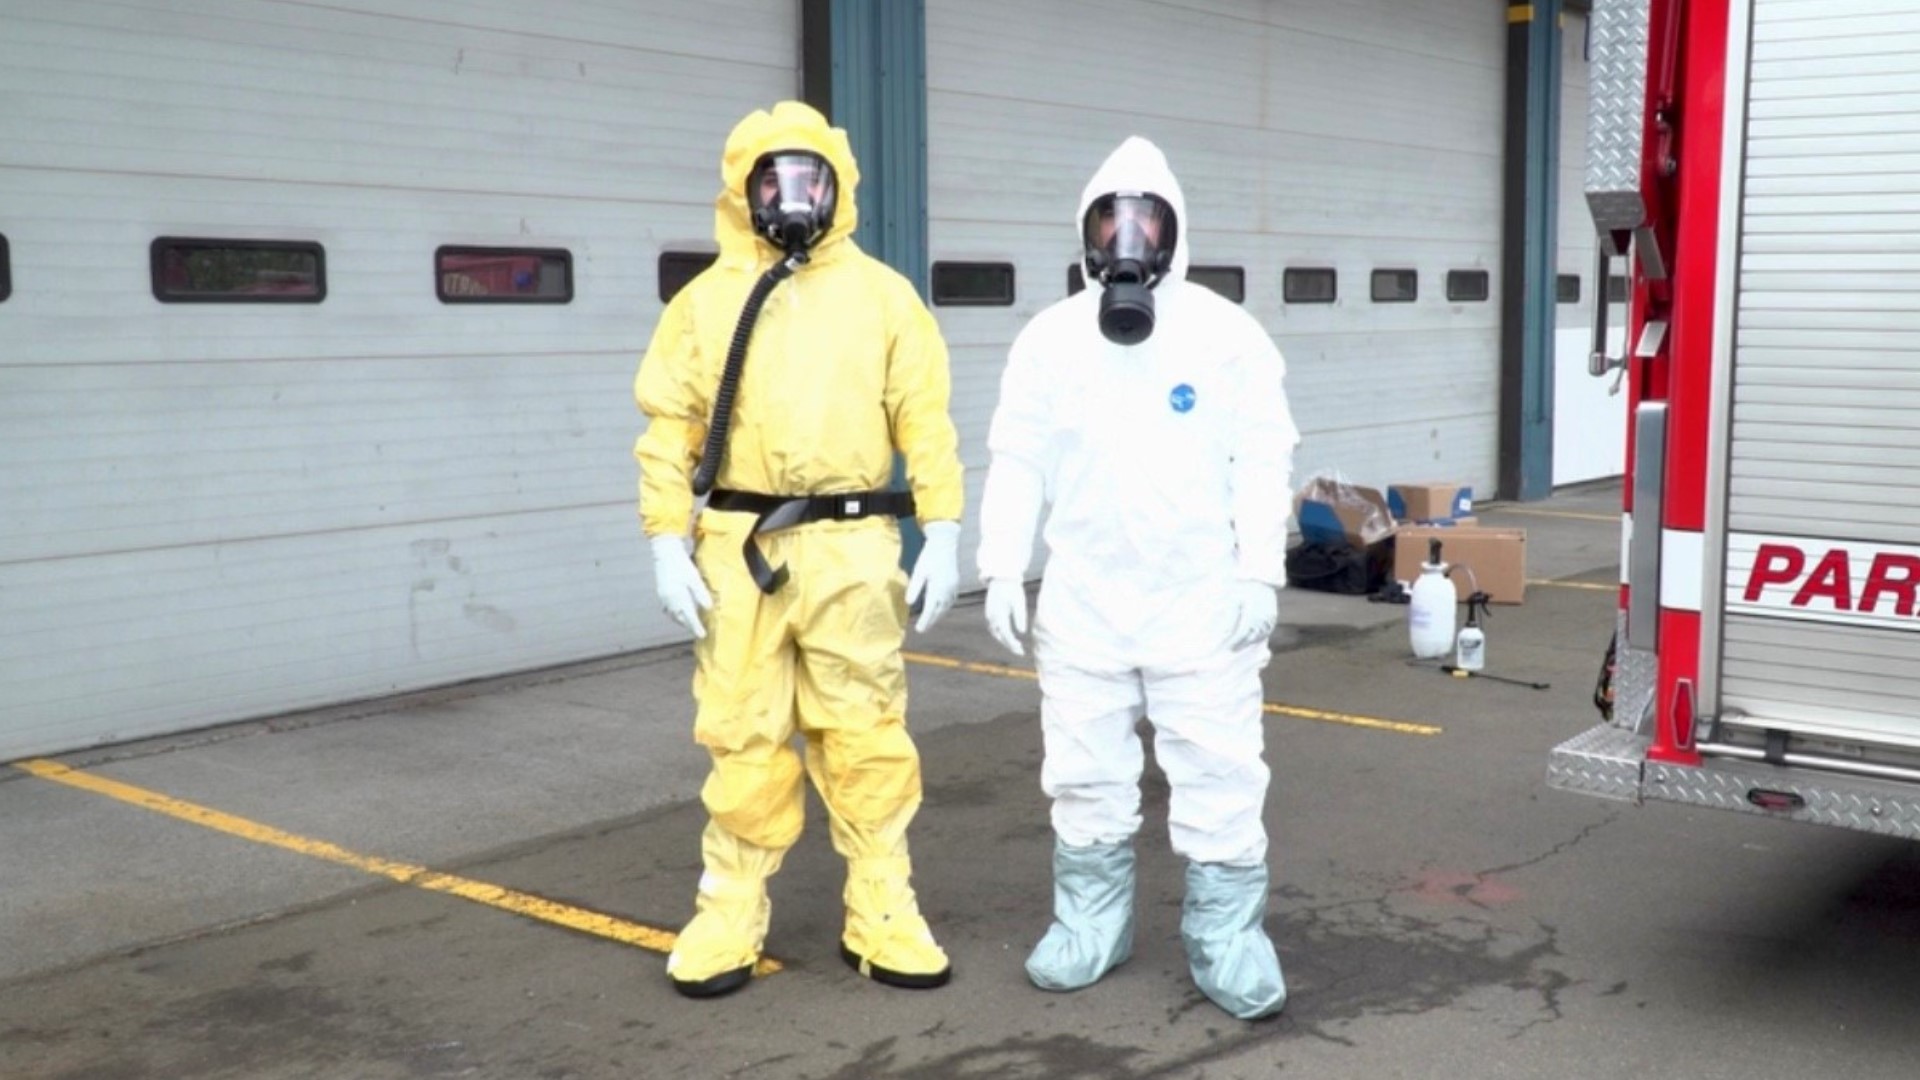 Portland firefighters will wear hazmat suits to medical calls